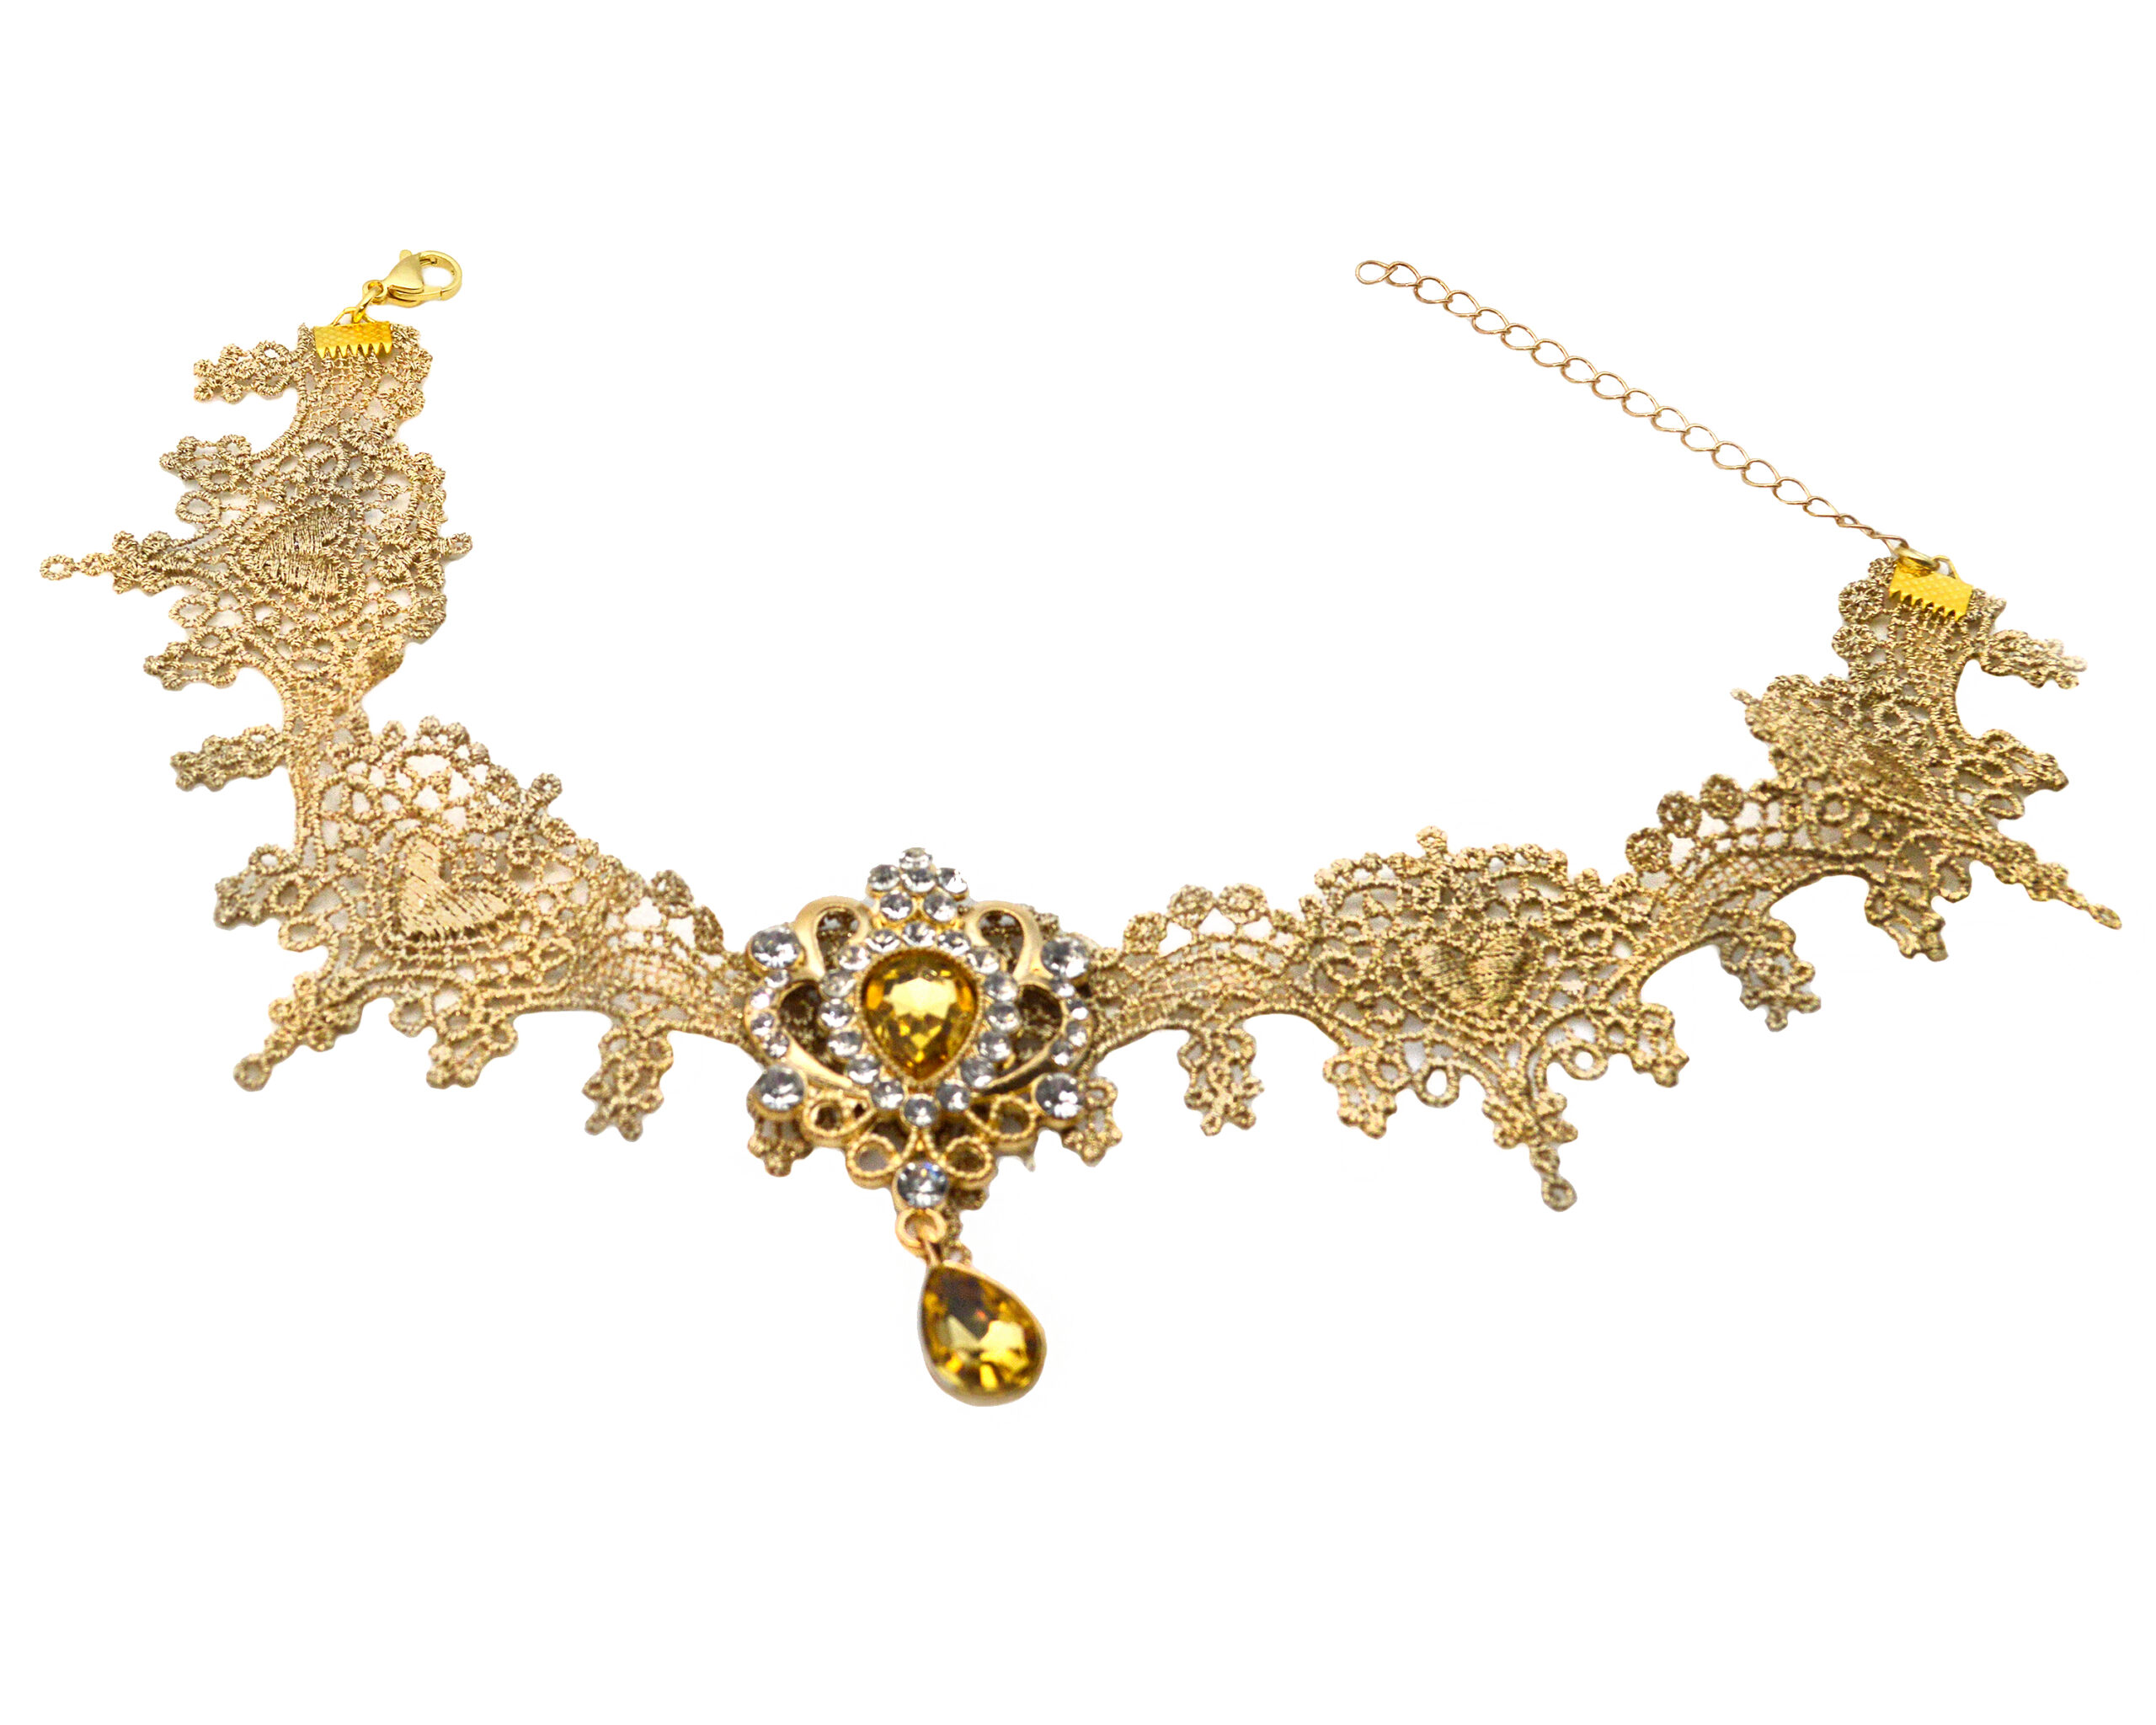 Victorian gold lace Gothic choker